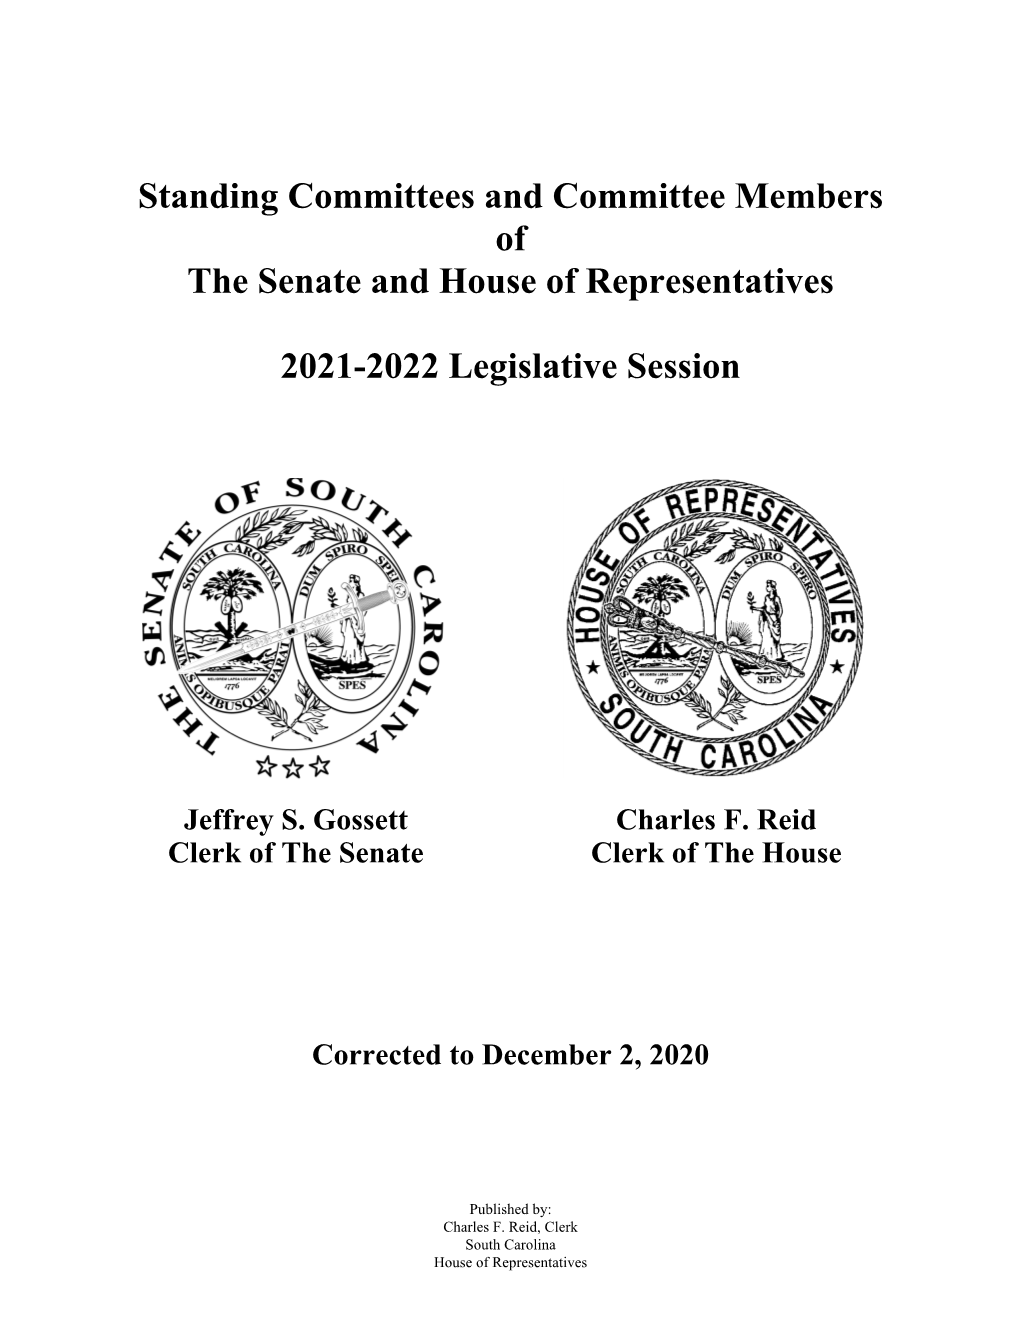 Standing Committees and Committee Members of the Senate and House of Representatives